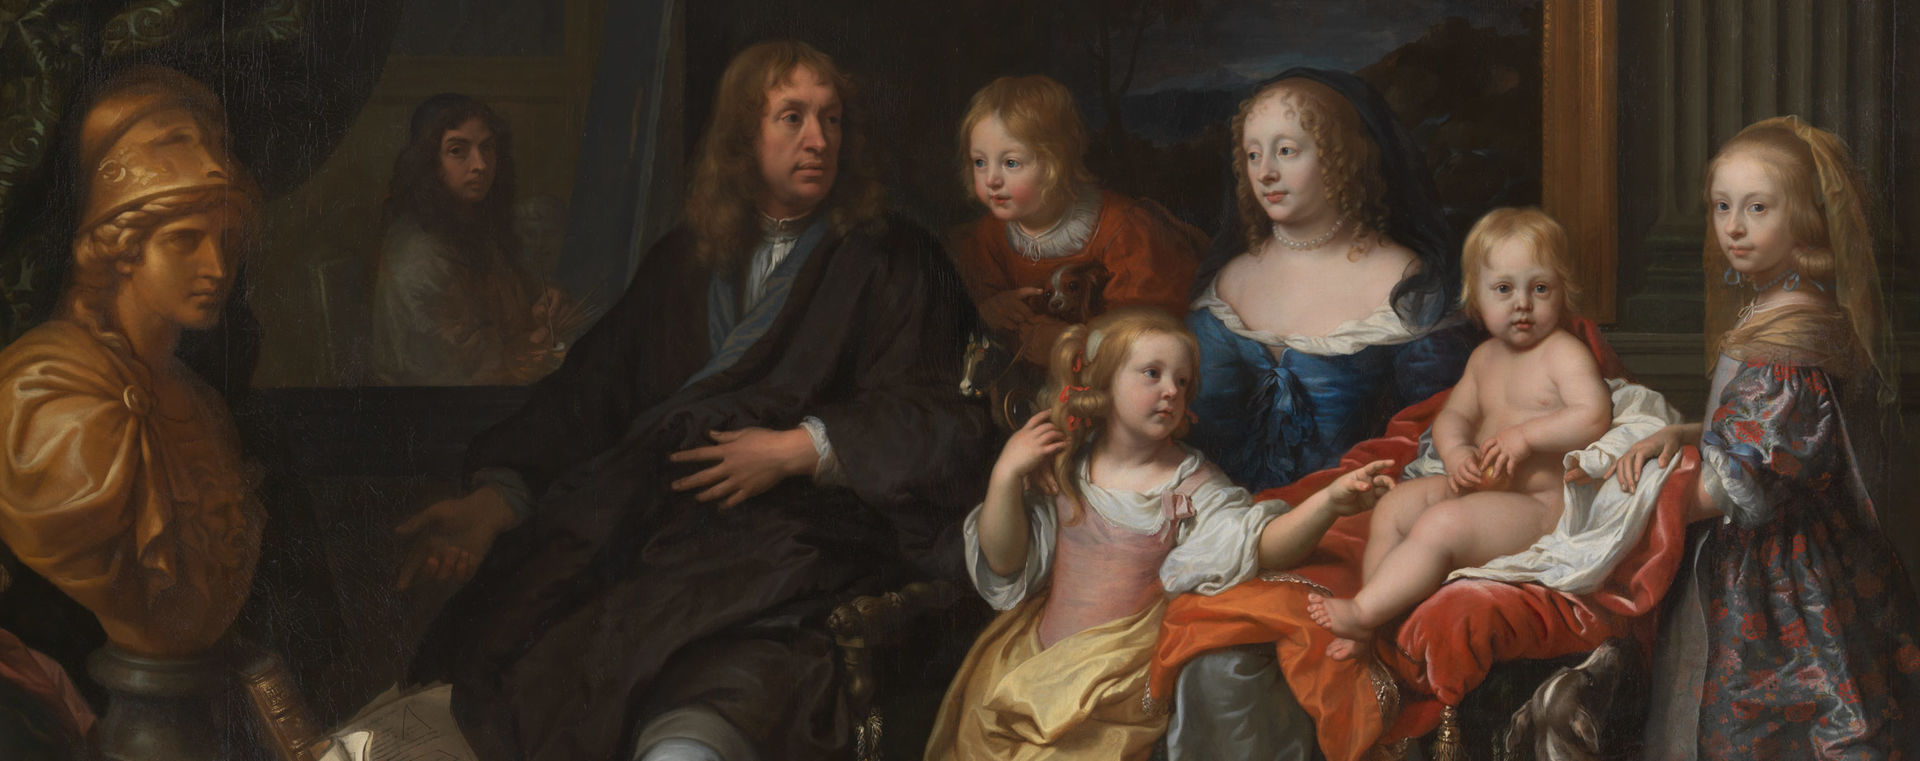 Detail view of Charles Le Brun's monumental painting "Everhard Jabach and His Family," depicting a wealthy European family in an ornately decorated room